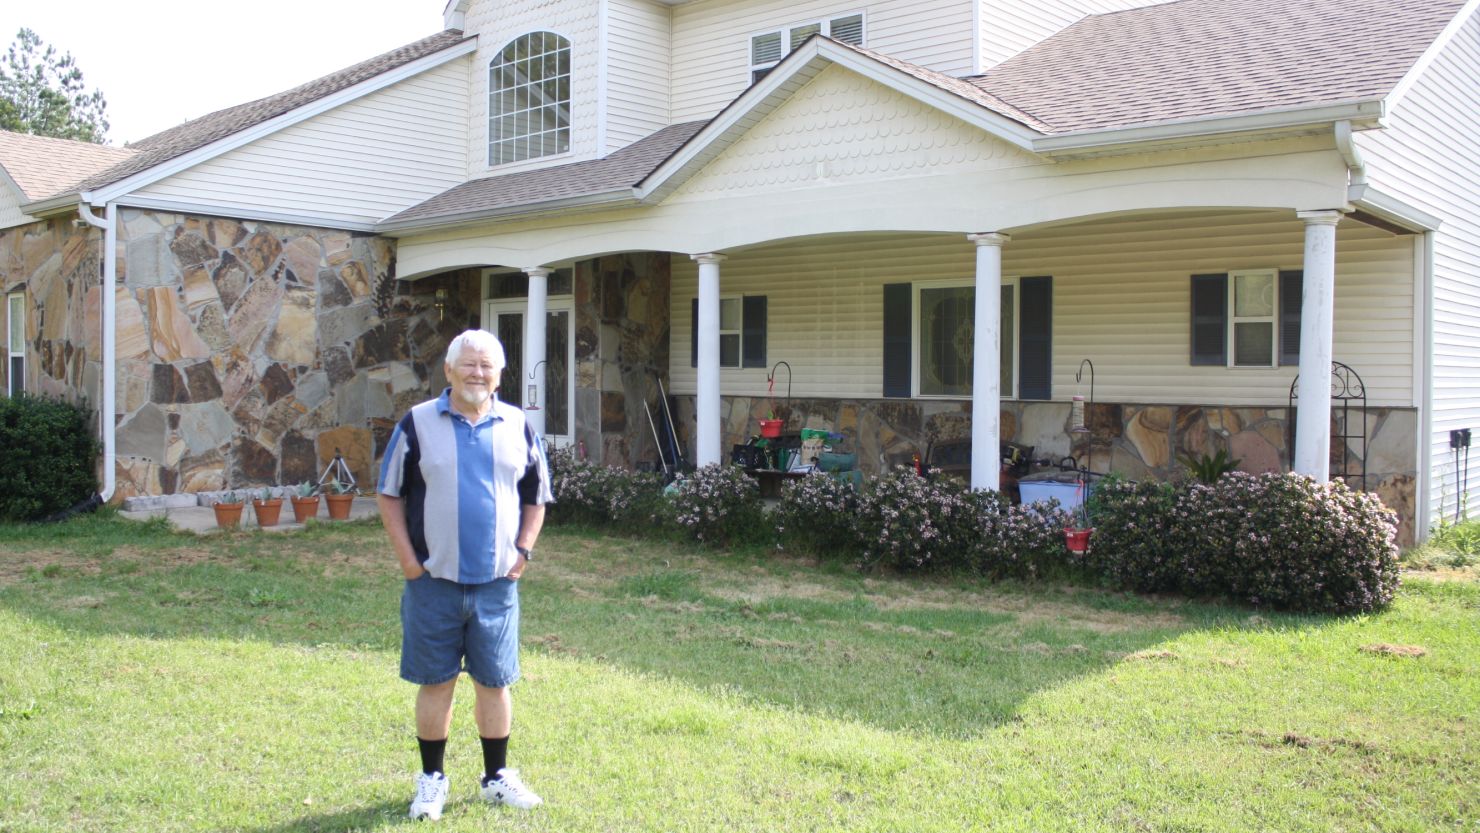 Robert Maddox of Juliette, Georgia, poses on his property. Maddox says Georgia Power expressed interest in buying his property after leveling the house next door and sealing the water well.